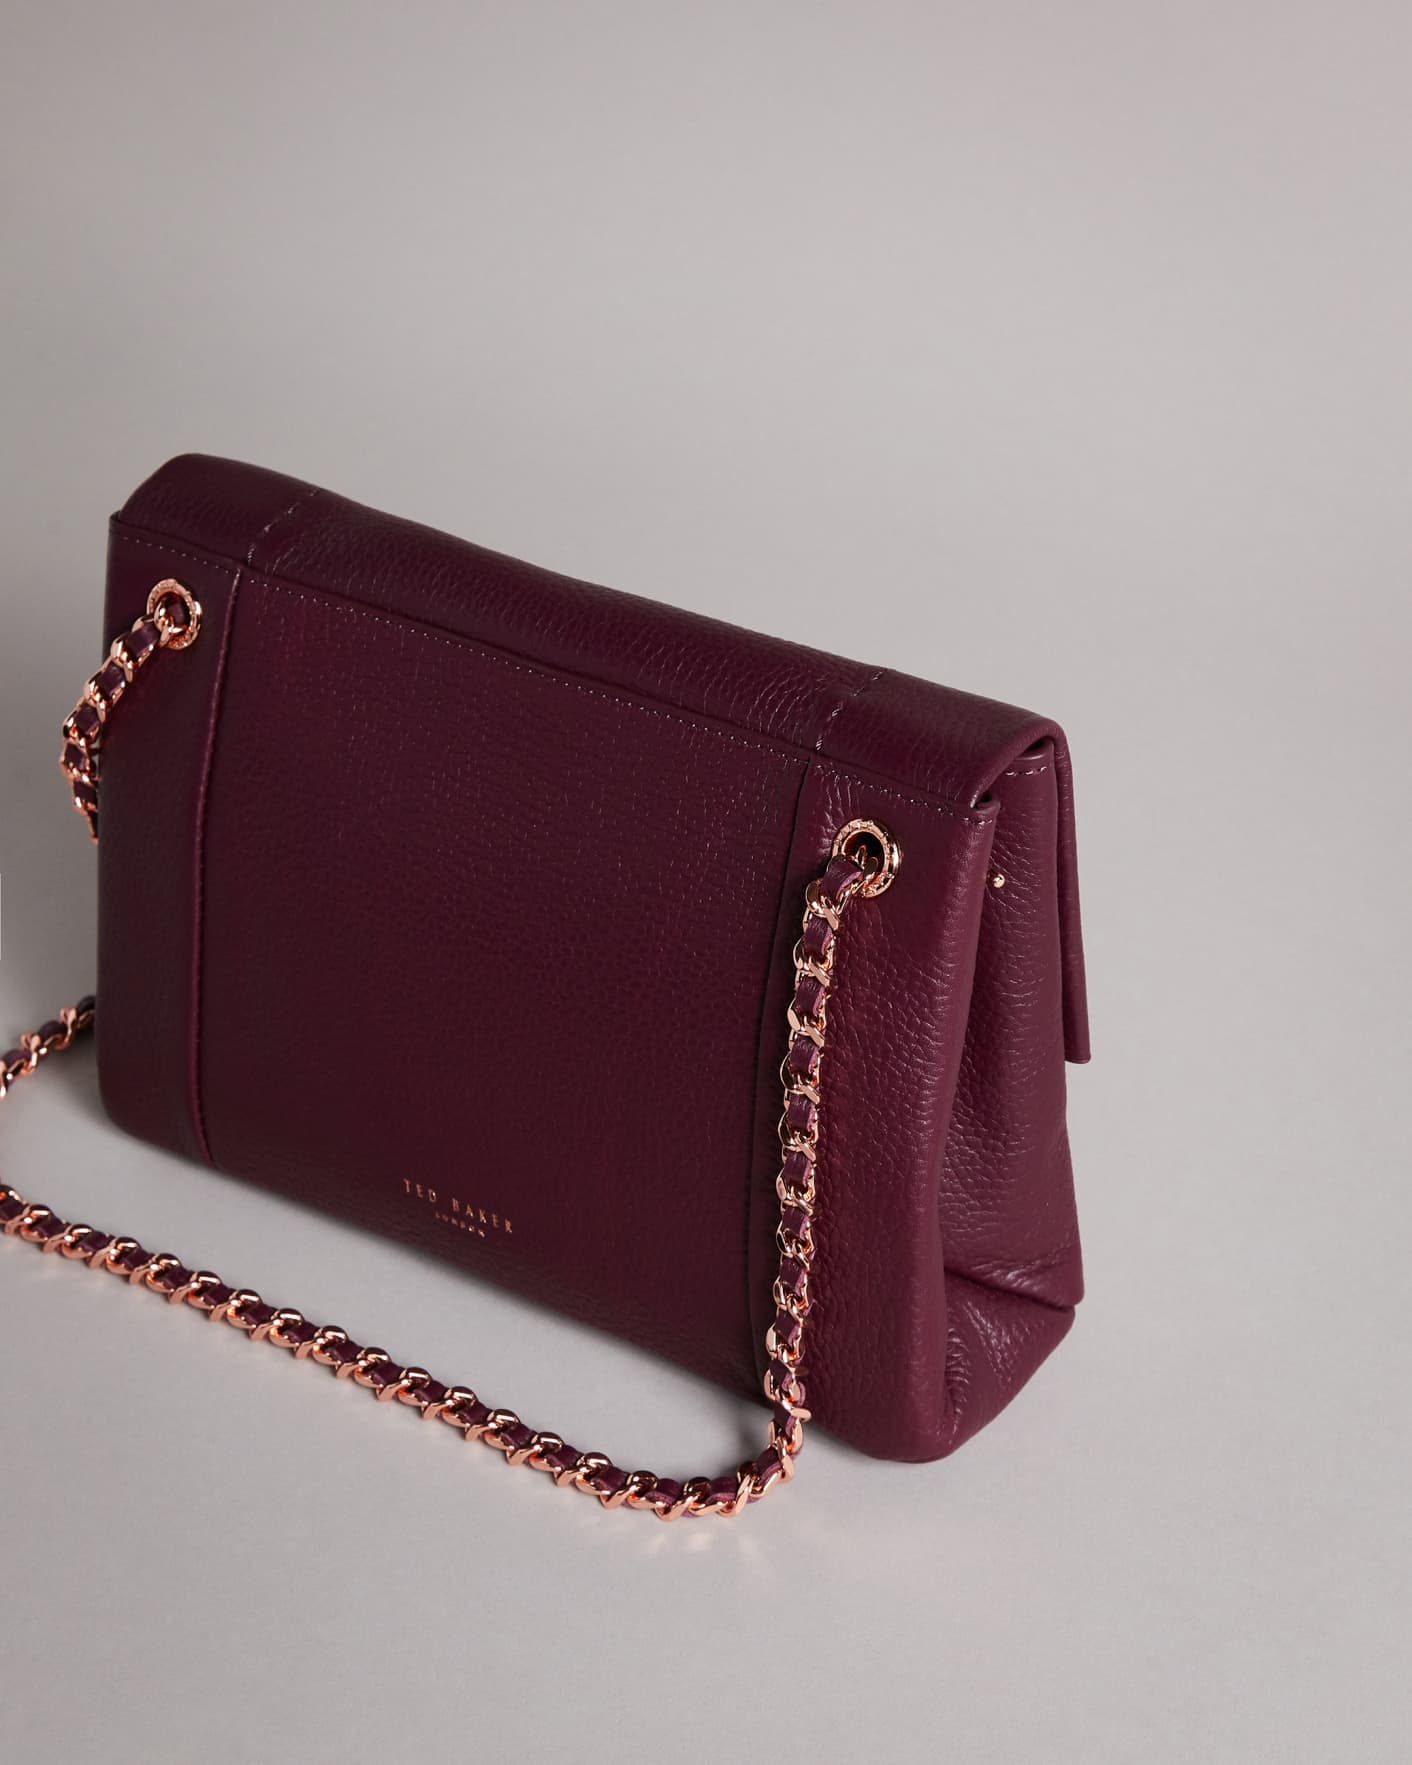 PURPLE UNLINED SOFT LEATHER XBODY BAG Ted Baker